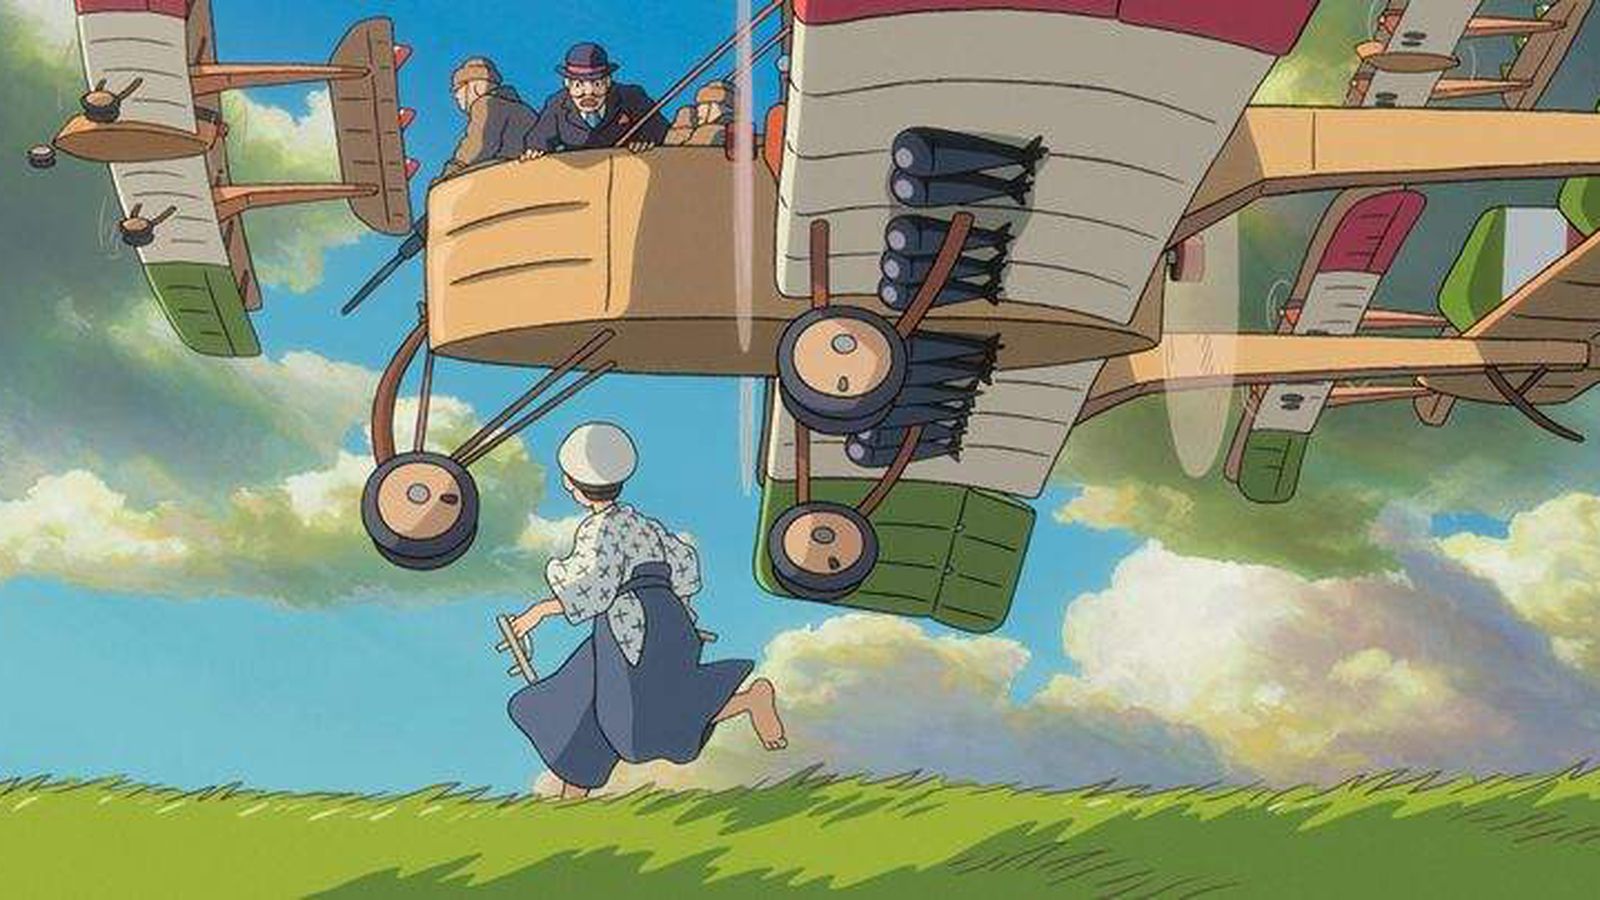 Review: 'The Wind Rises' soars